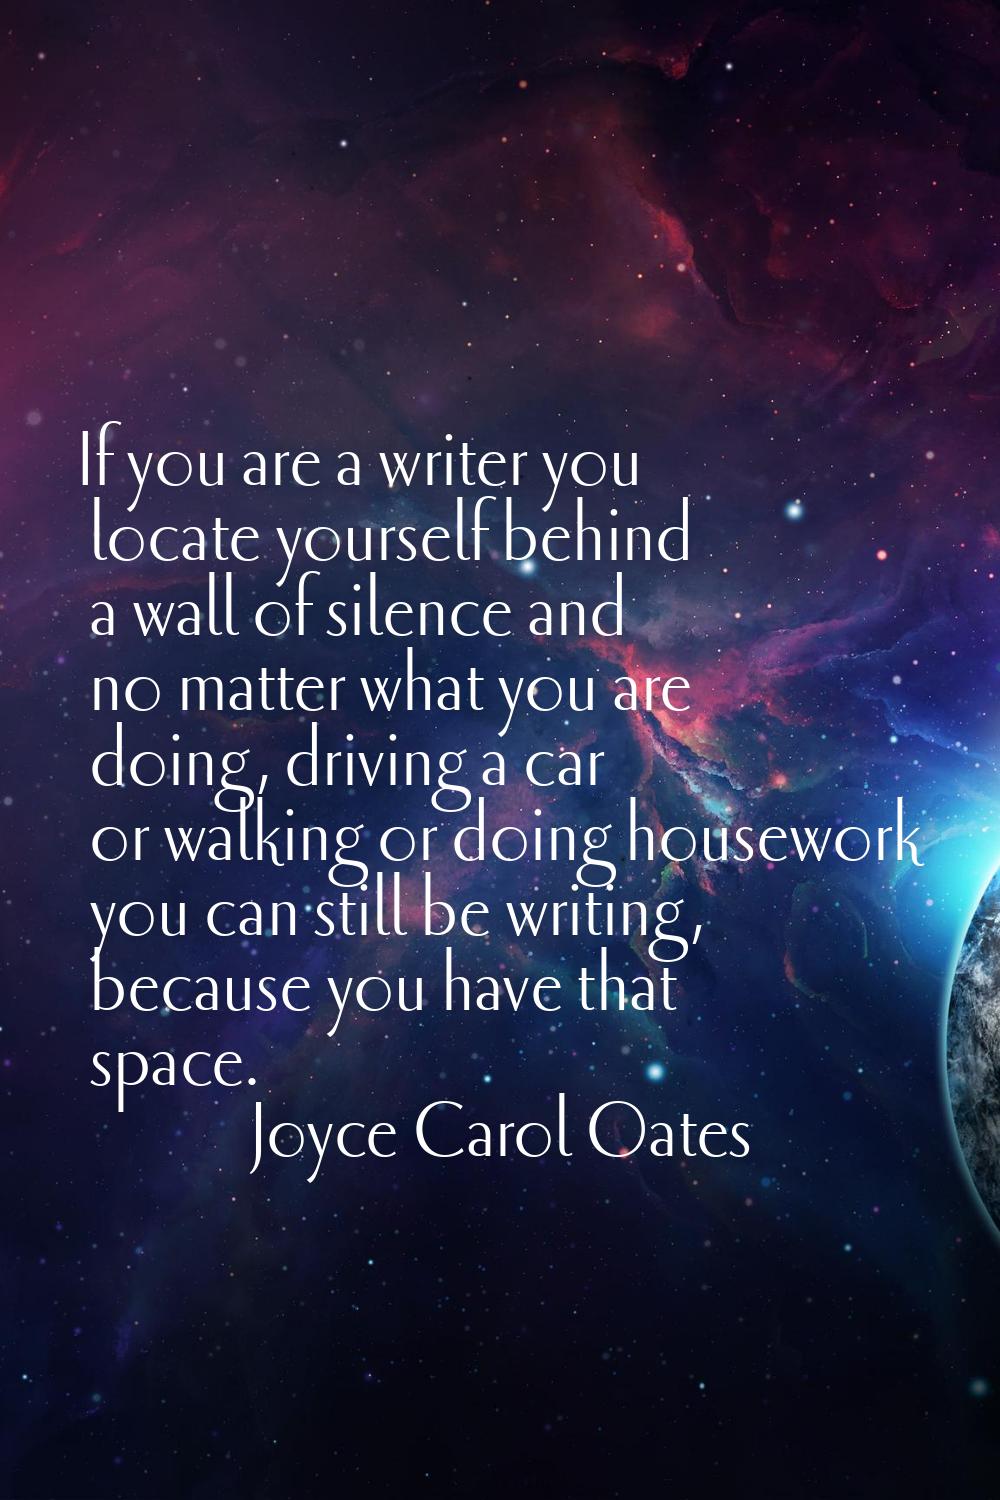 If you are a writer you locate yourself behind a wall of silence and no matter what you are doing, 